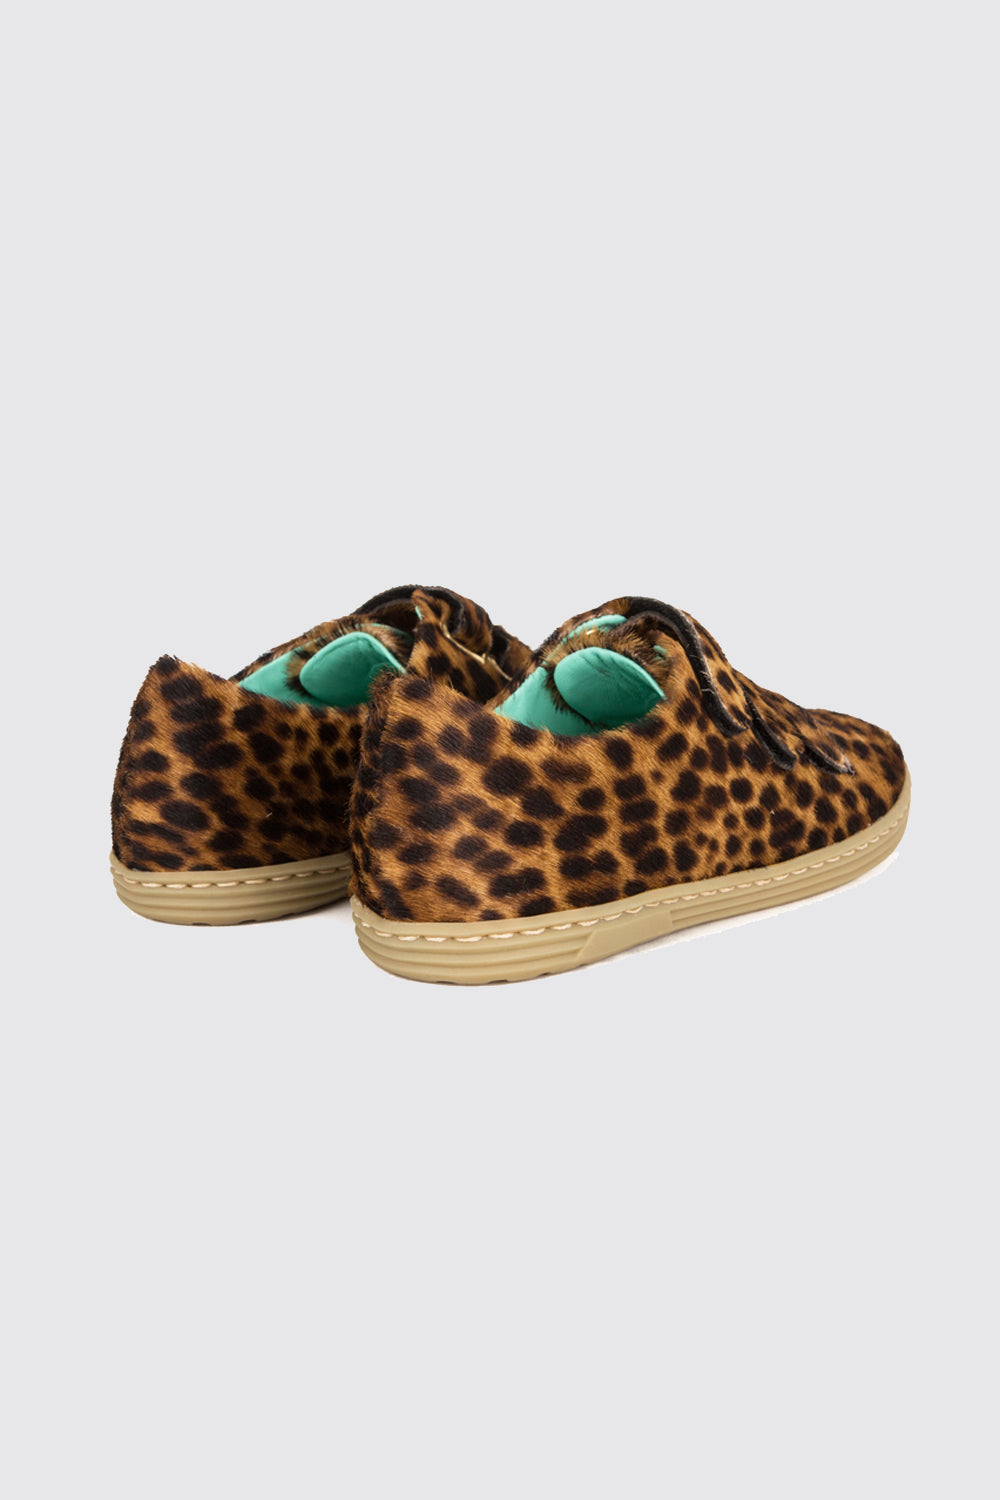 Sneakers in leopard printed leather